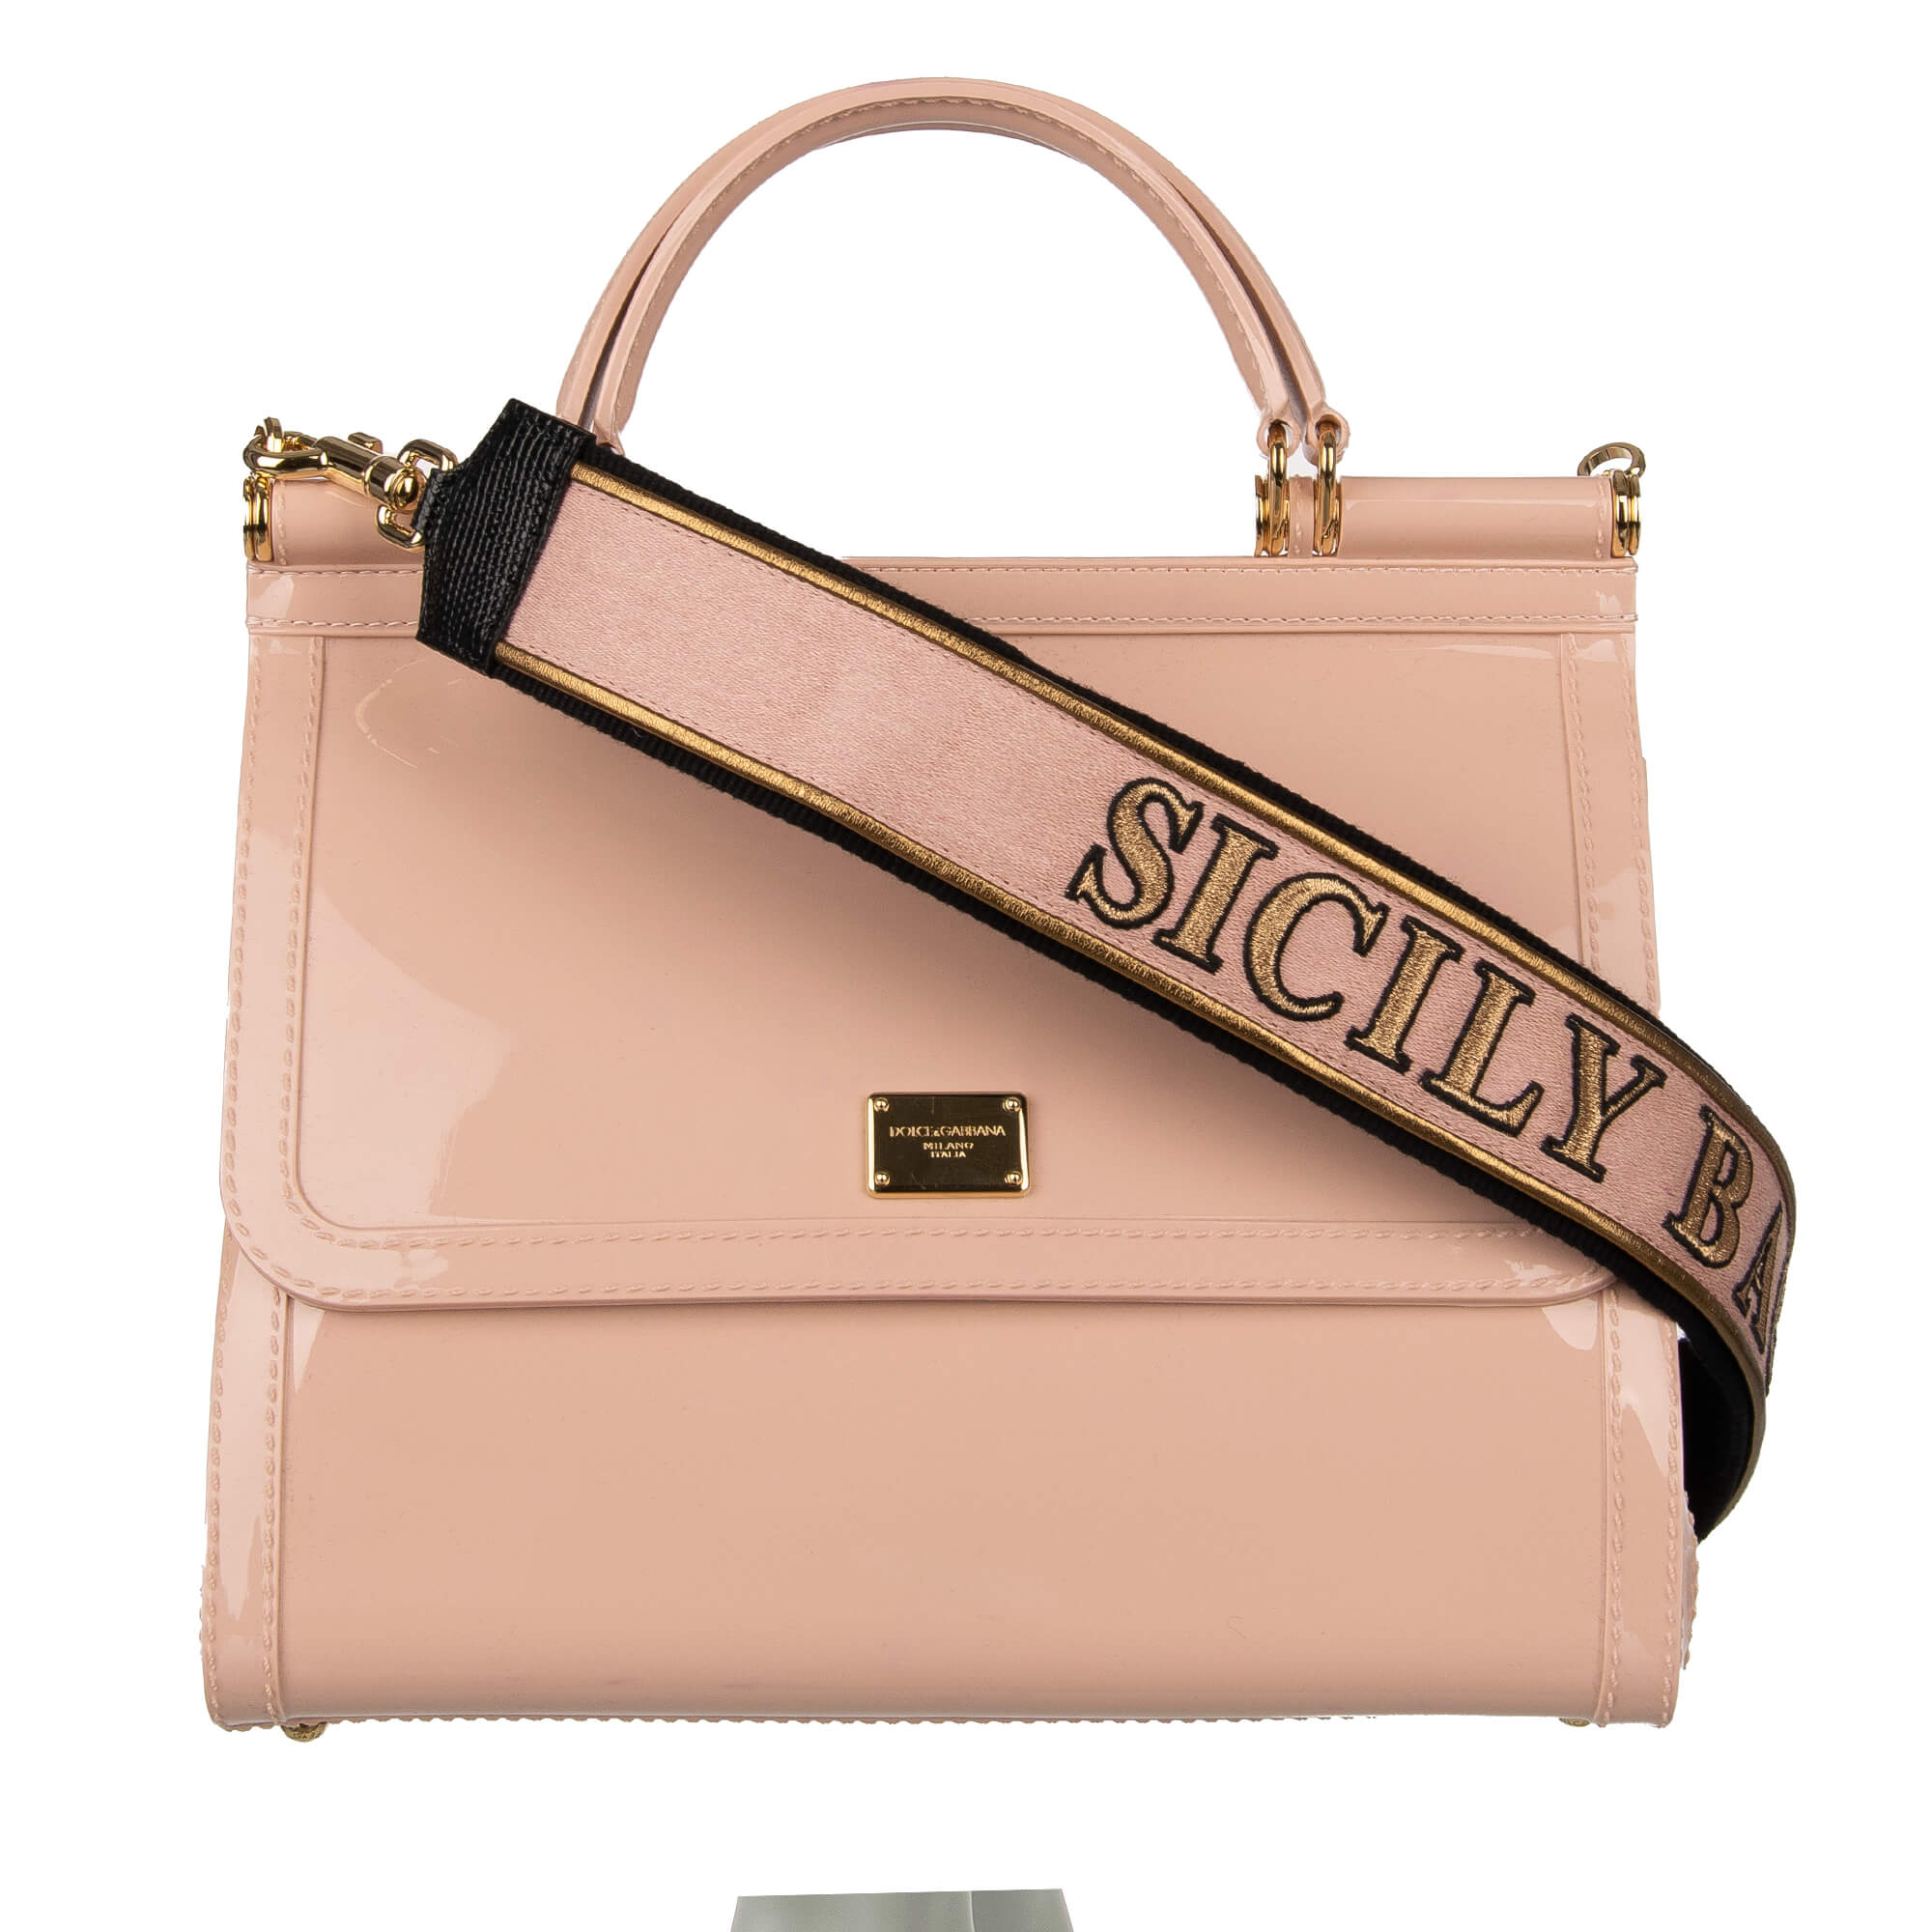 Dolce & Gabbana PVC Tote Shoulder Bag SICILY with Embroidered Strap and  Logo Pink | FASHION ROOMS